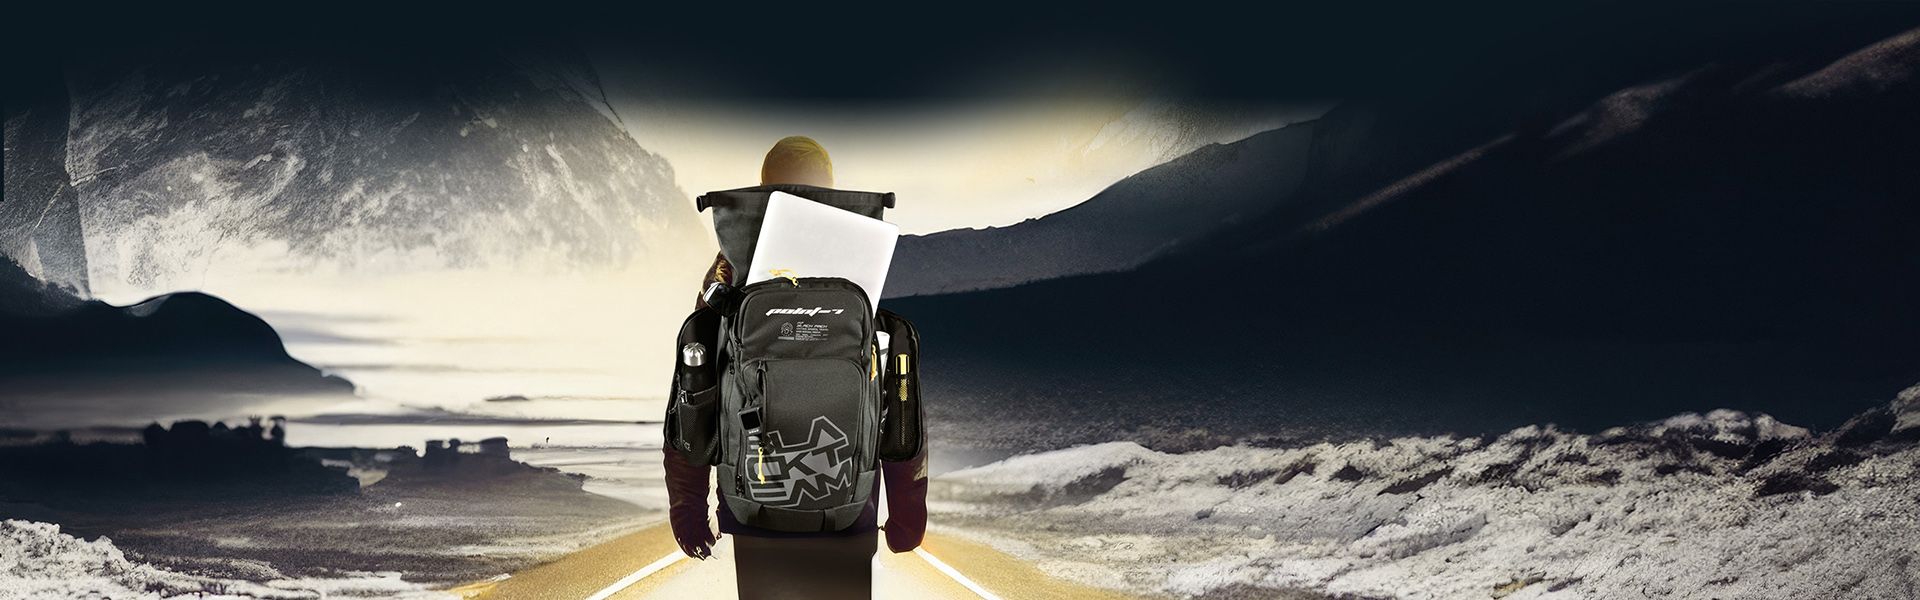 P7_BackPack_1920x600